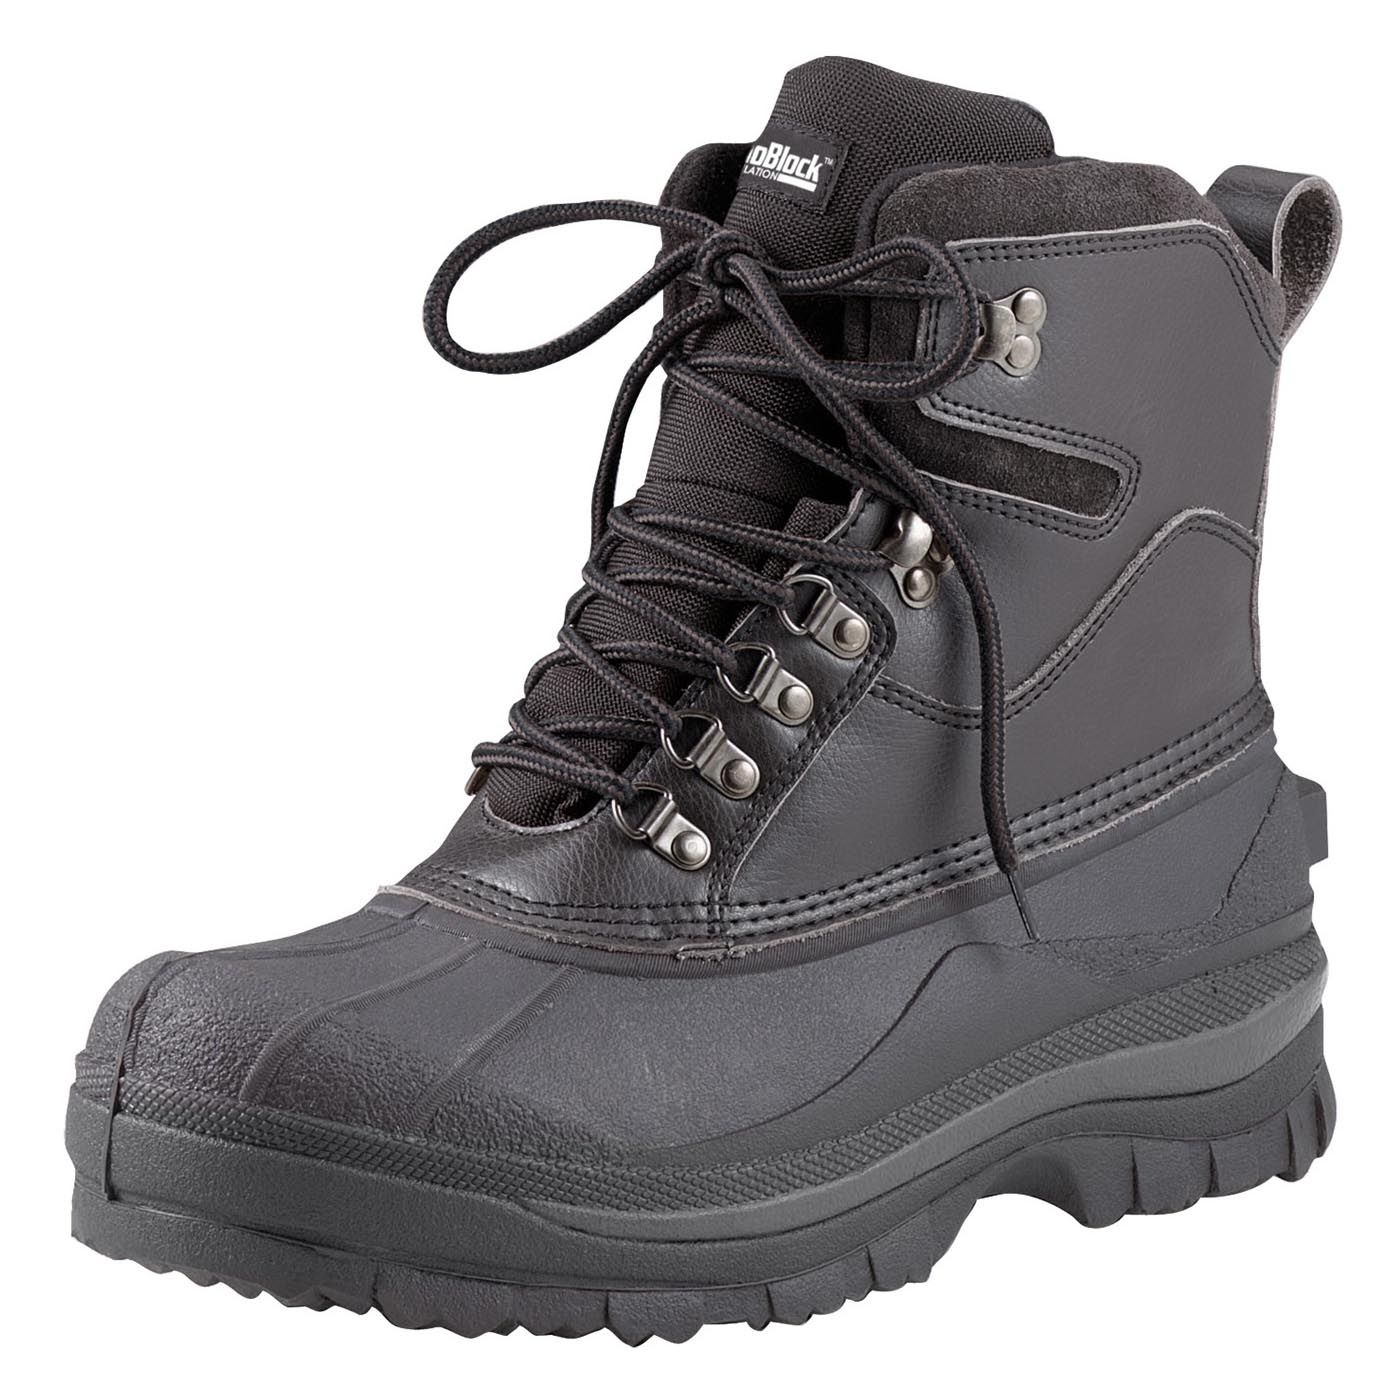 Boots - Rothco Cold Weather Hiking Boots